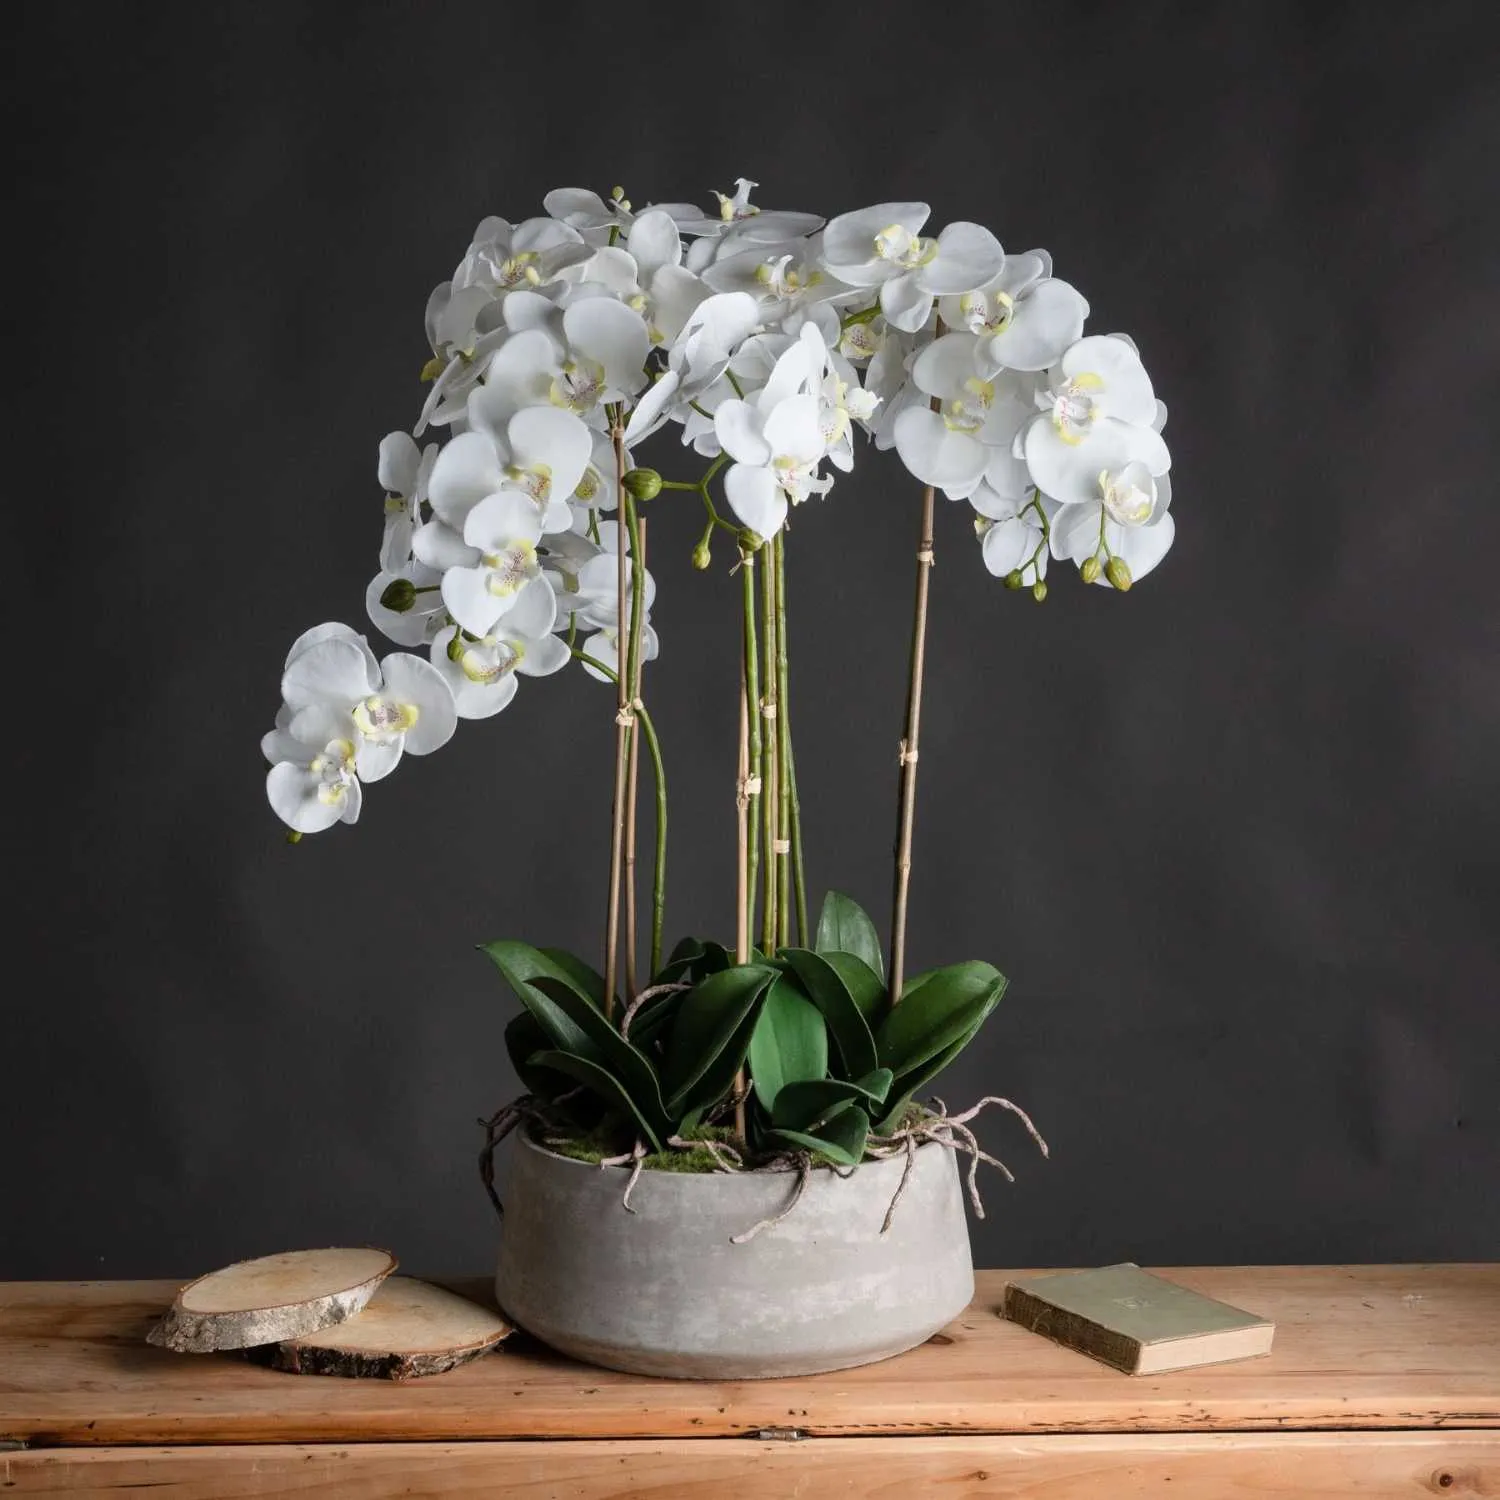 Large Silk White Orchid With Succulents In a Modern Round Stone Pot